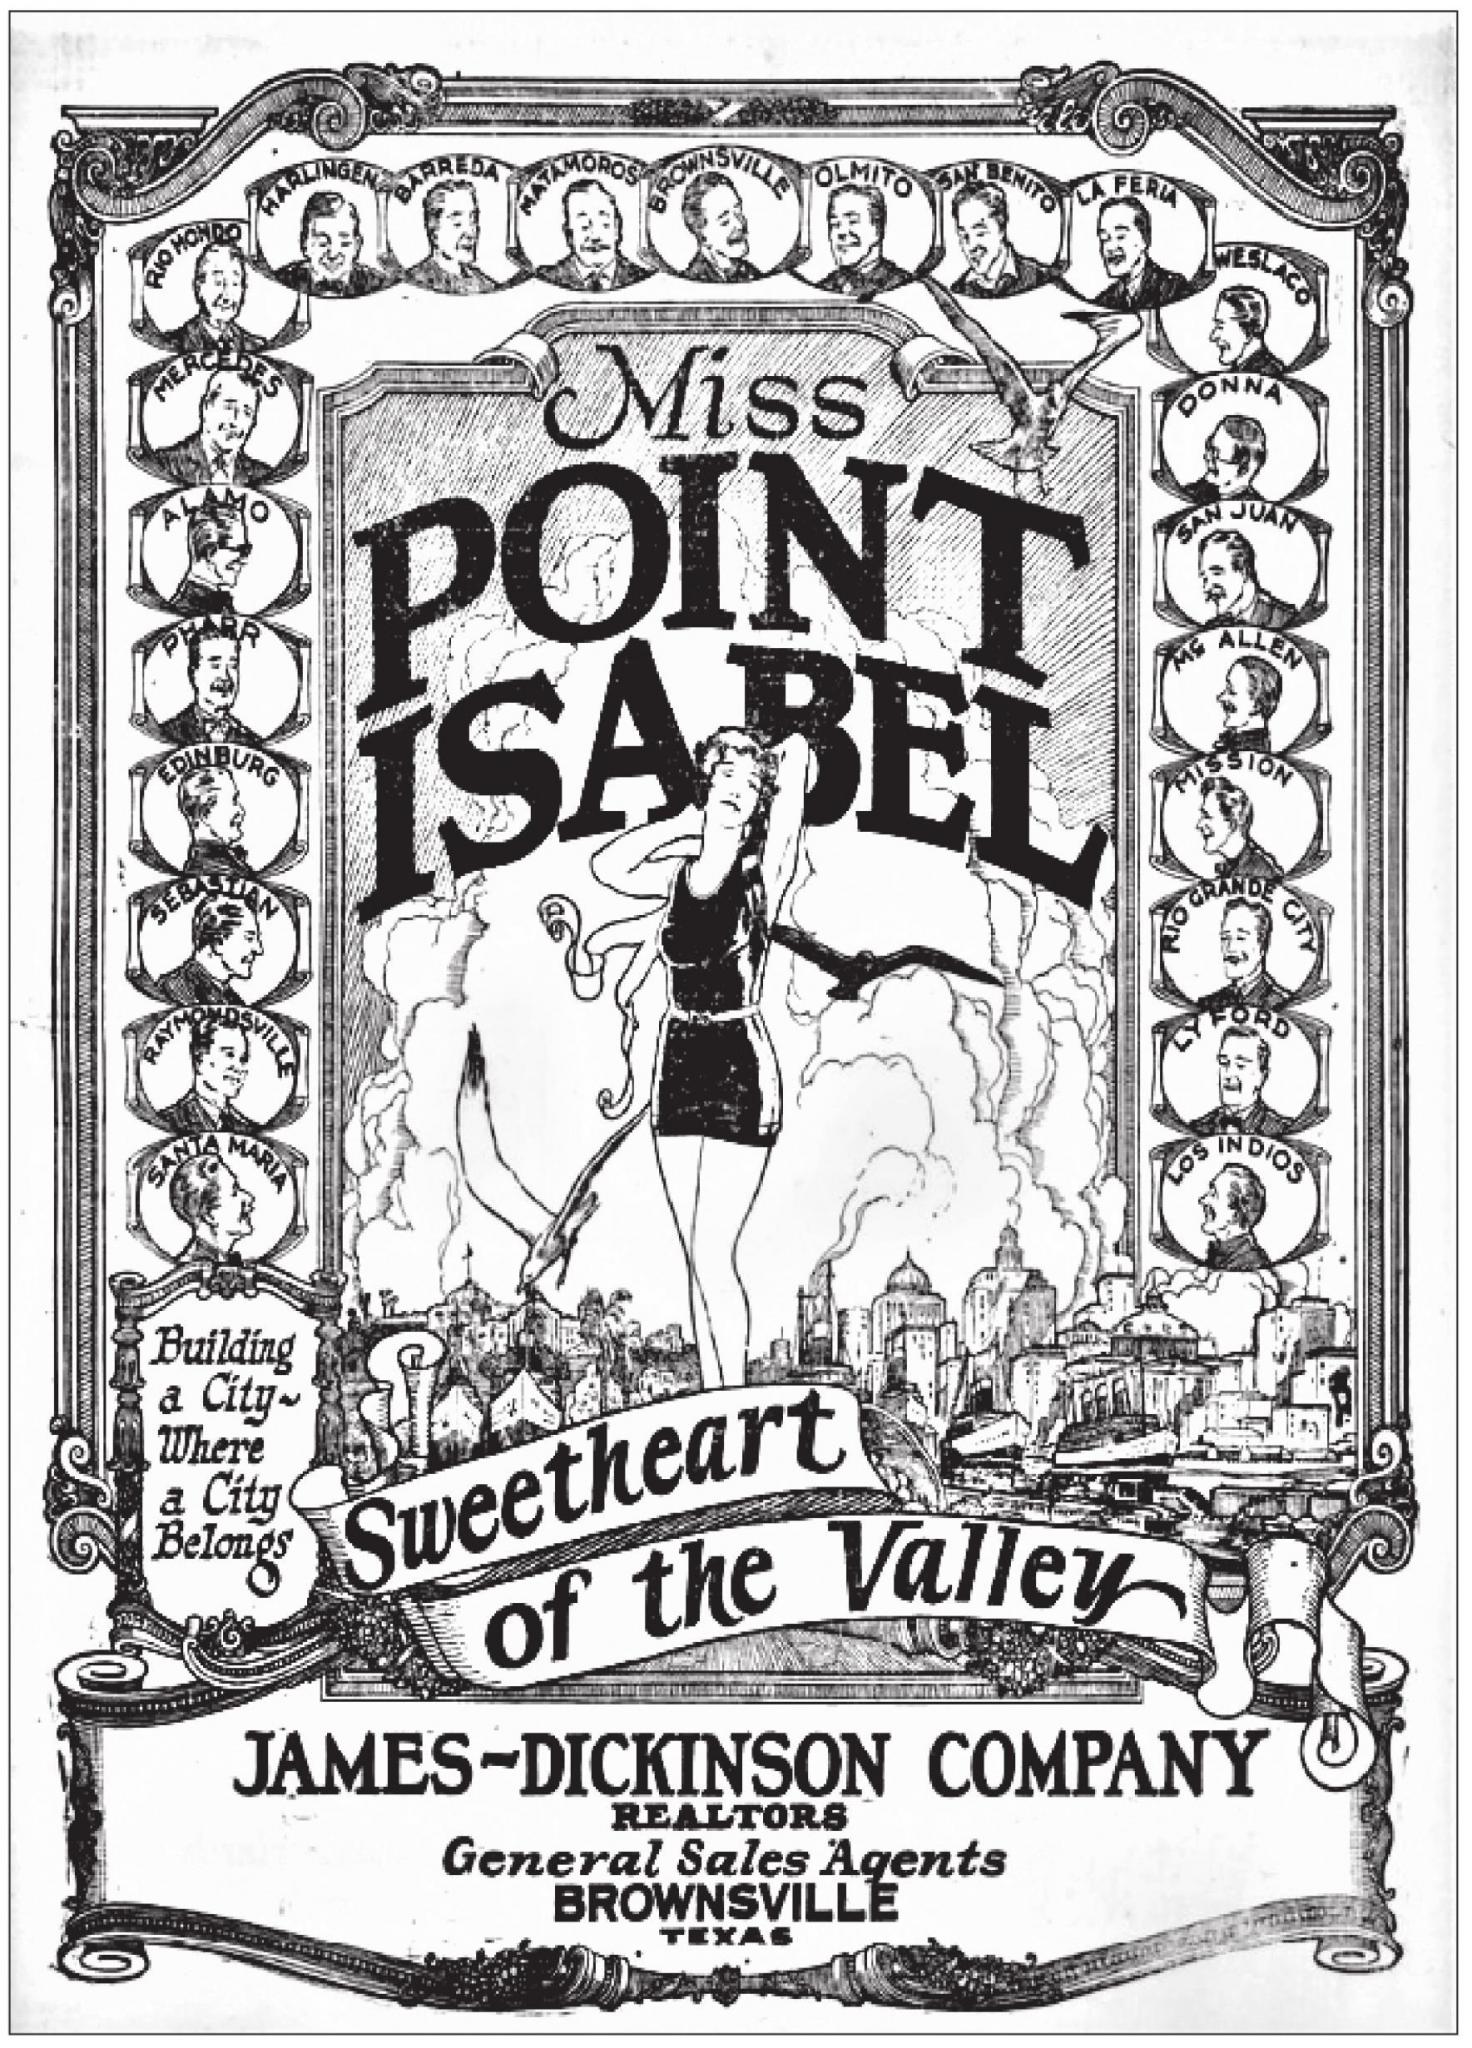 The 1927 newspaper sketch advertisement of Miss Point Isabel. Photo Courtesy Rene Torres